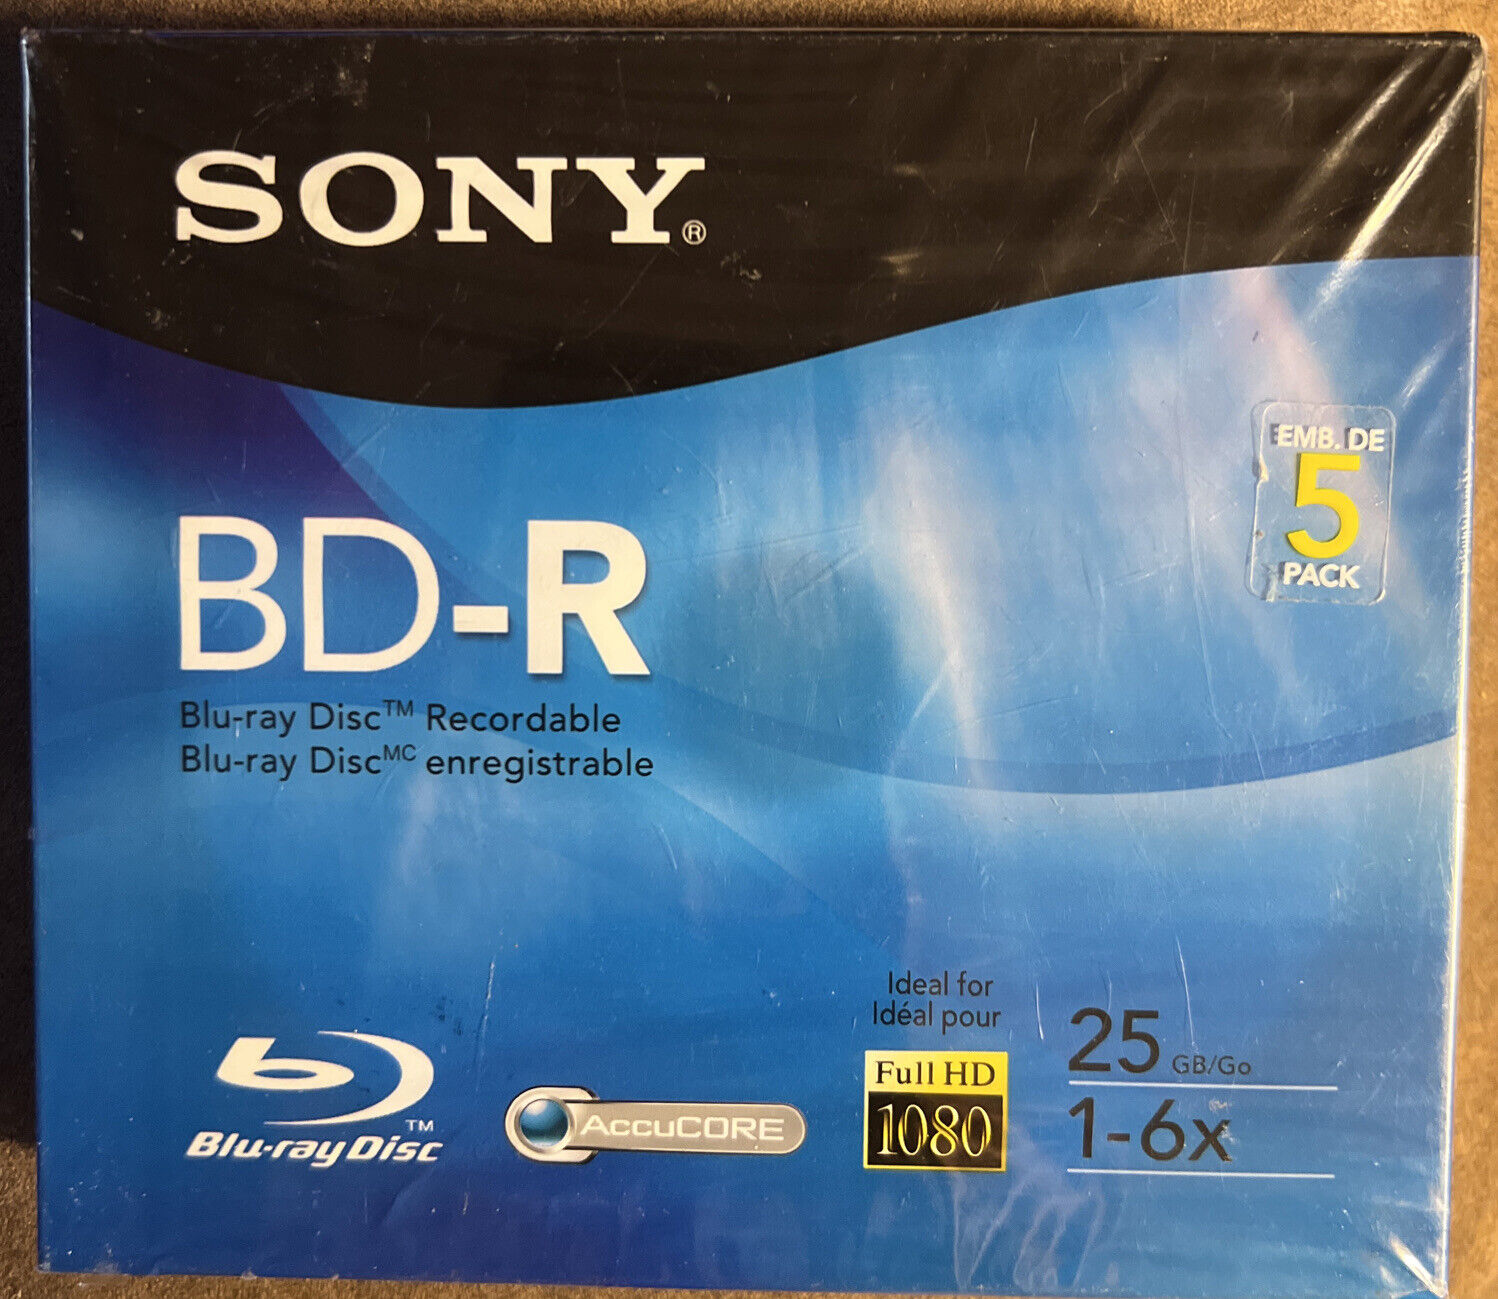 SONY 5 Pack BD-R Blu-ray Disc Recordable - Full HD 1080 25 GB NEW SEALED